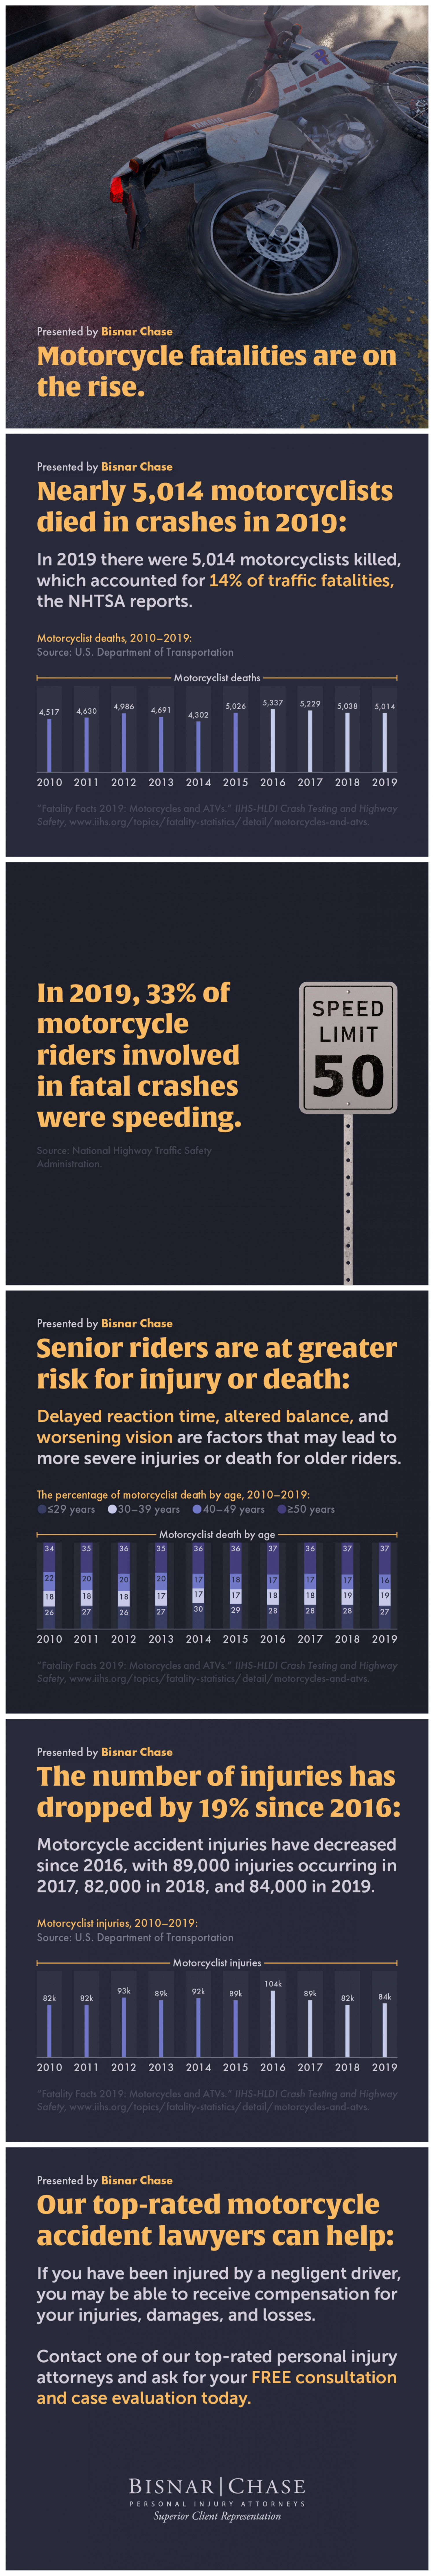 Fatality Facts 2019 - Motorcycles Infographic